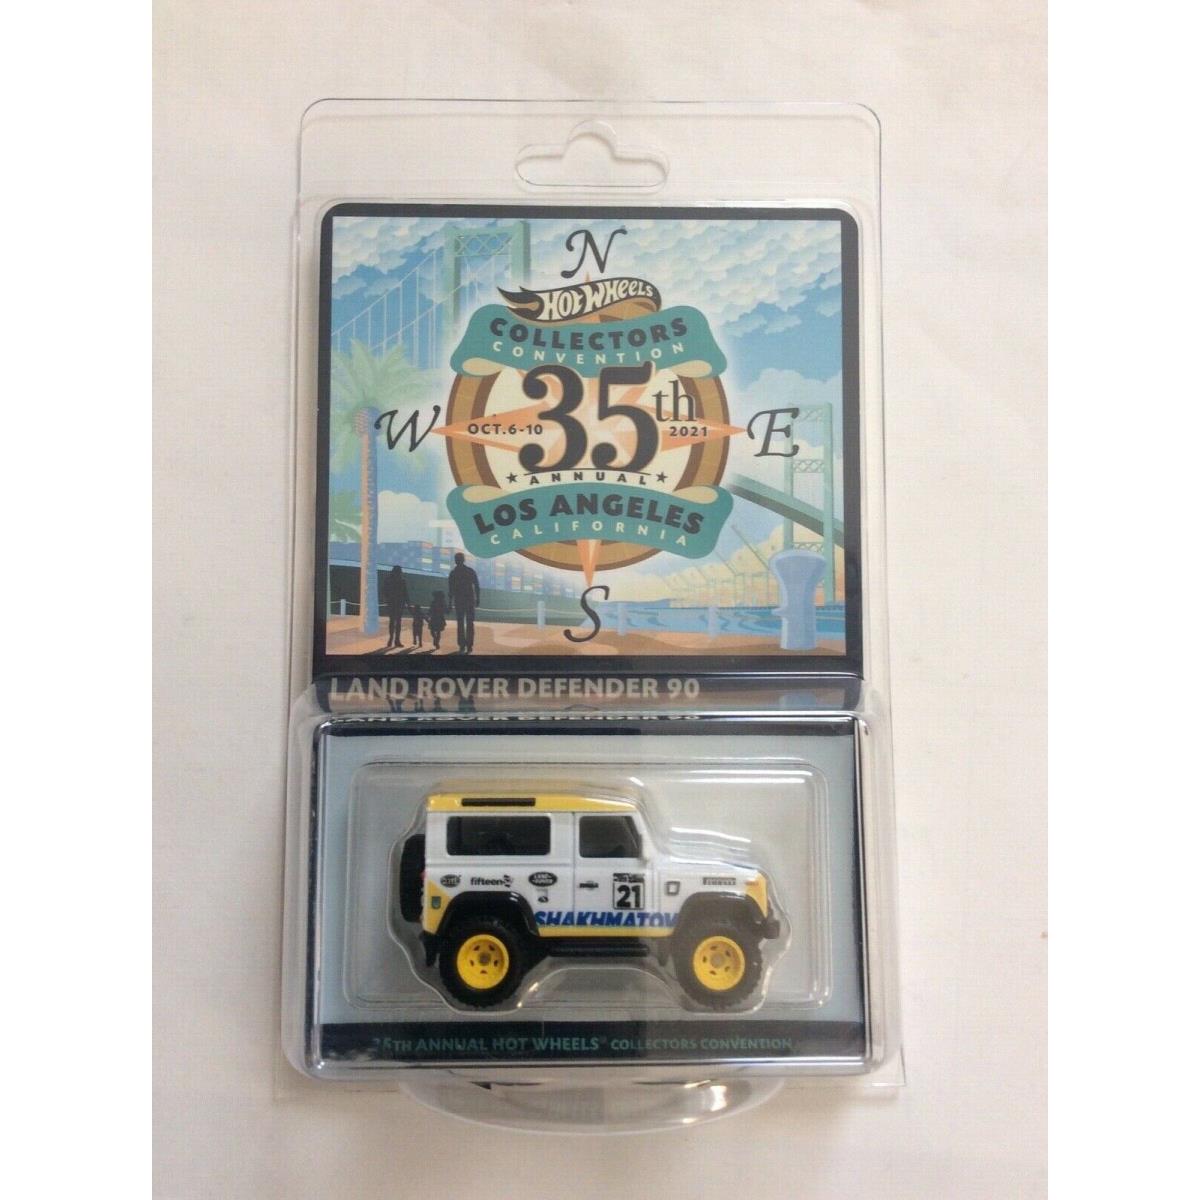 Hot Wheels 35th La. Convention Land Rover Defender 90 Dinner Car 2630 OF 4000